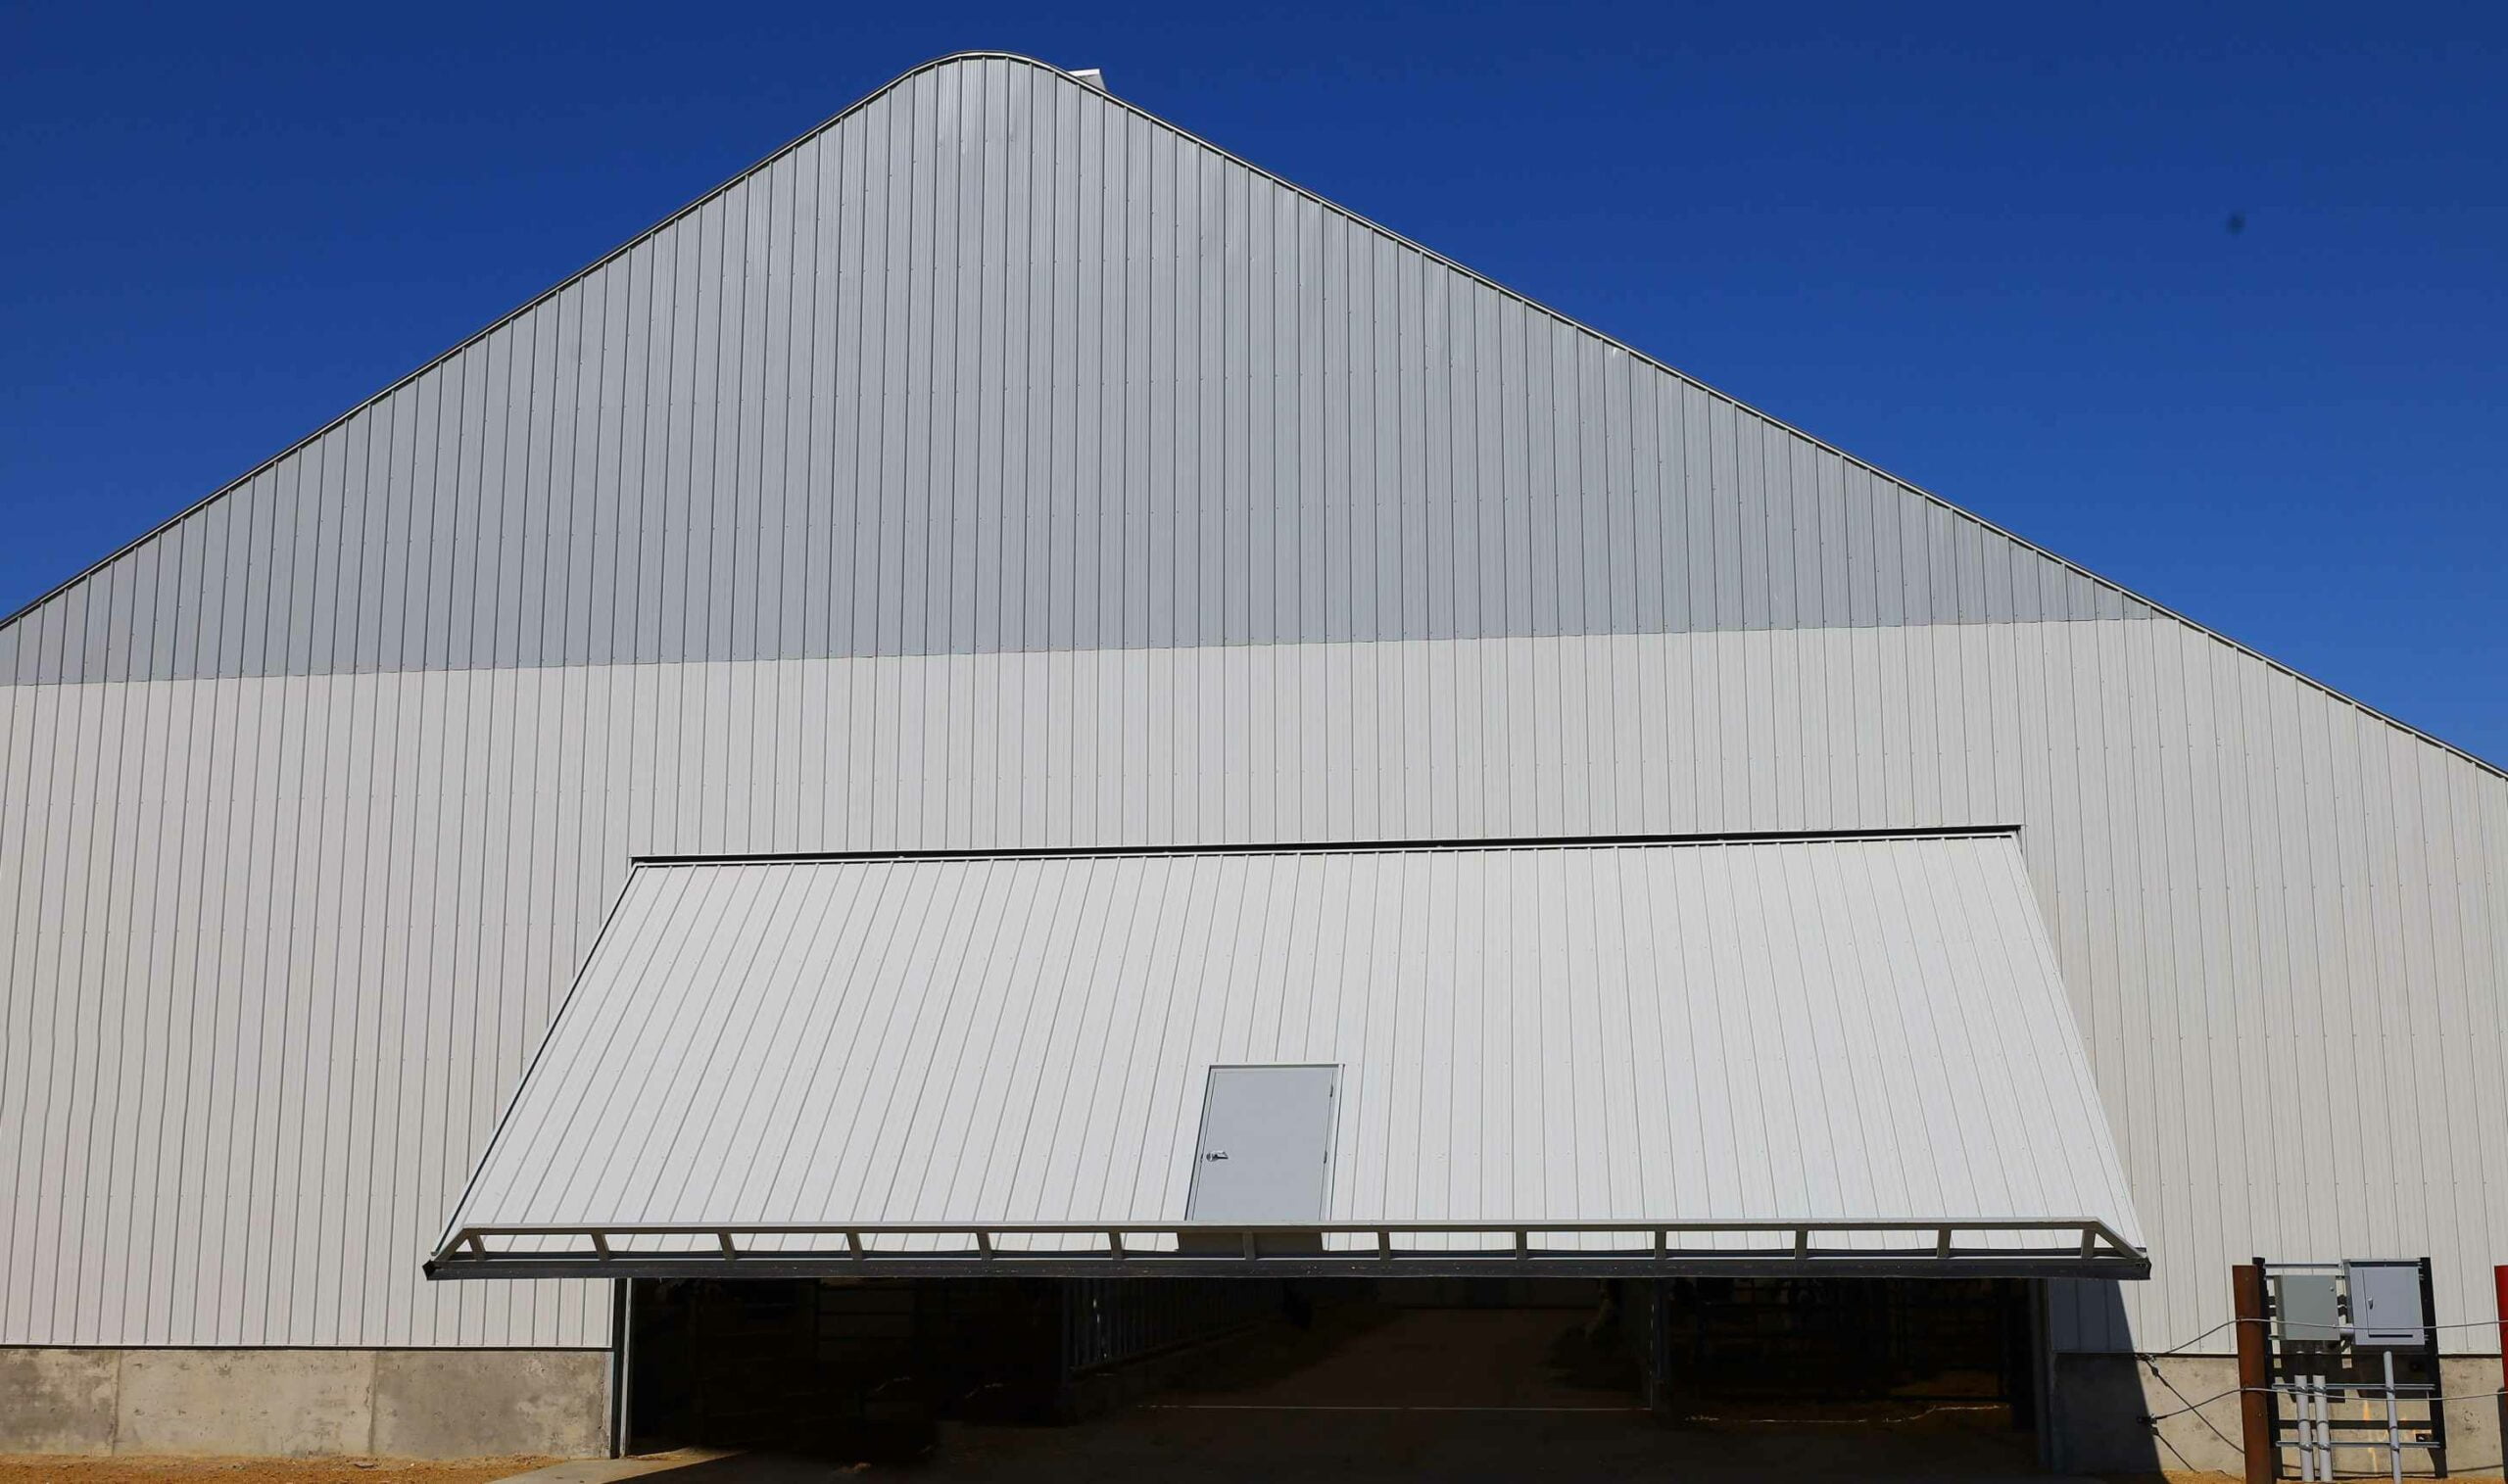 Dairy fabric barn 2 - 40' x 20' PLift doors AB (8) post PS resized for website